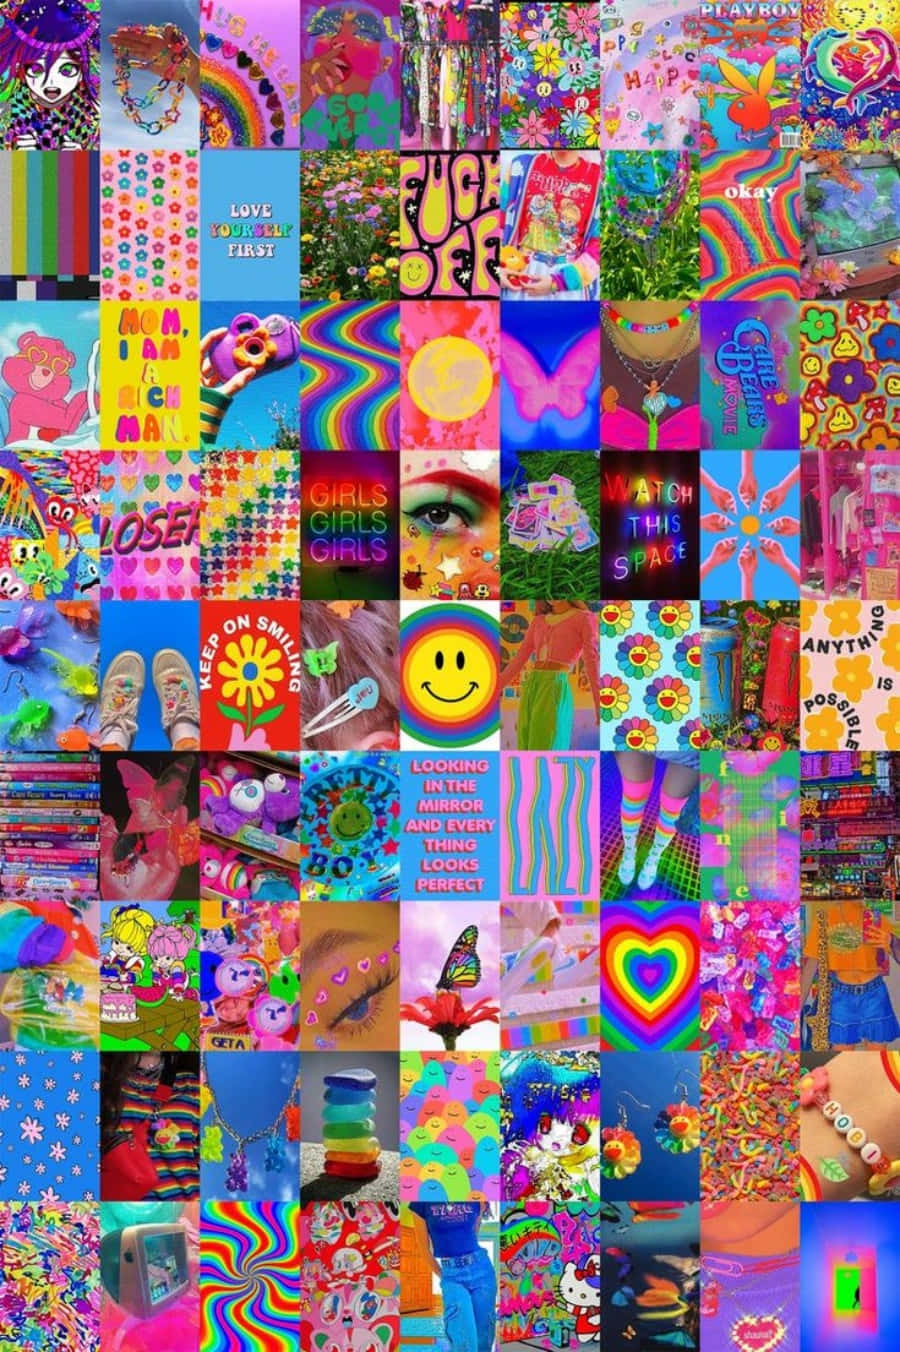 A Collage Of Colorful Pictures And Designs